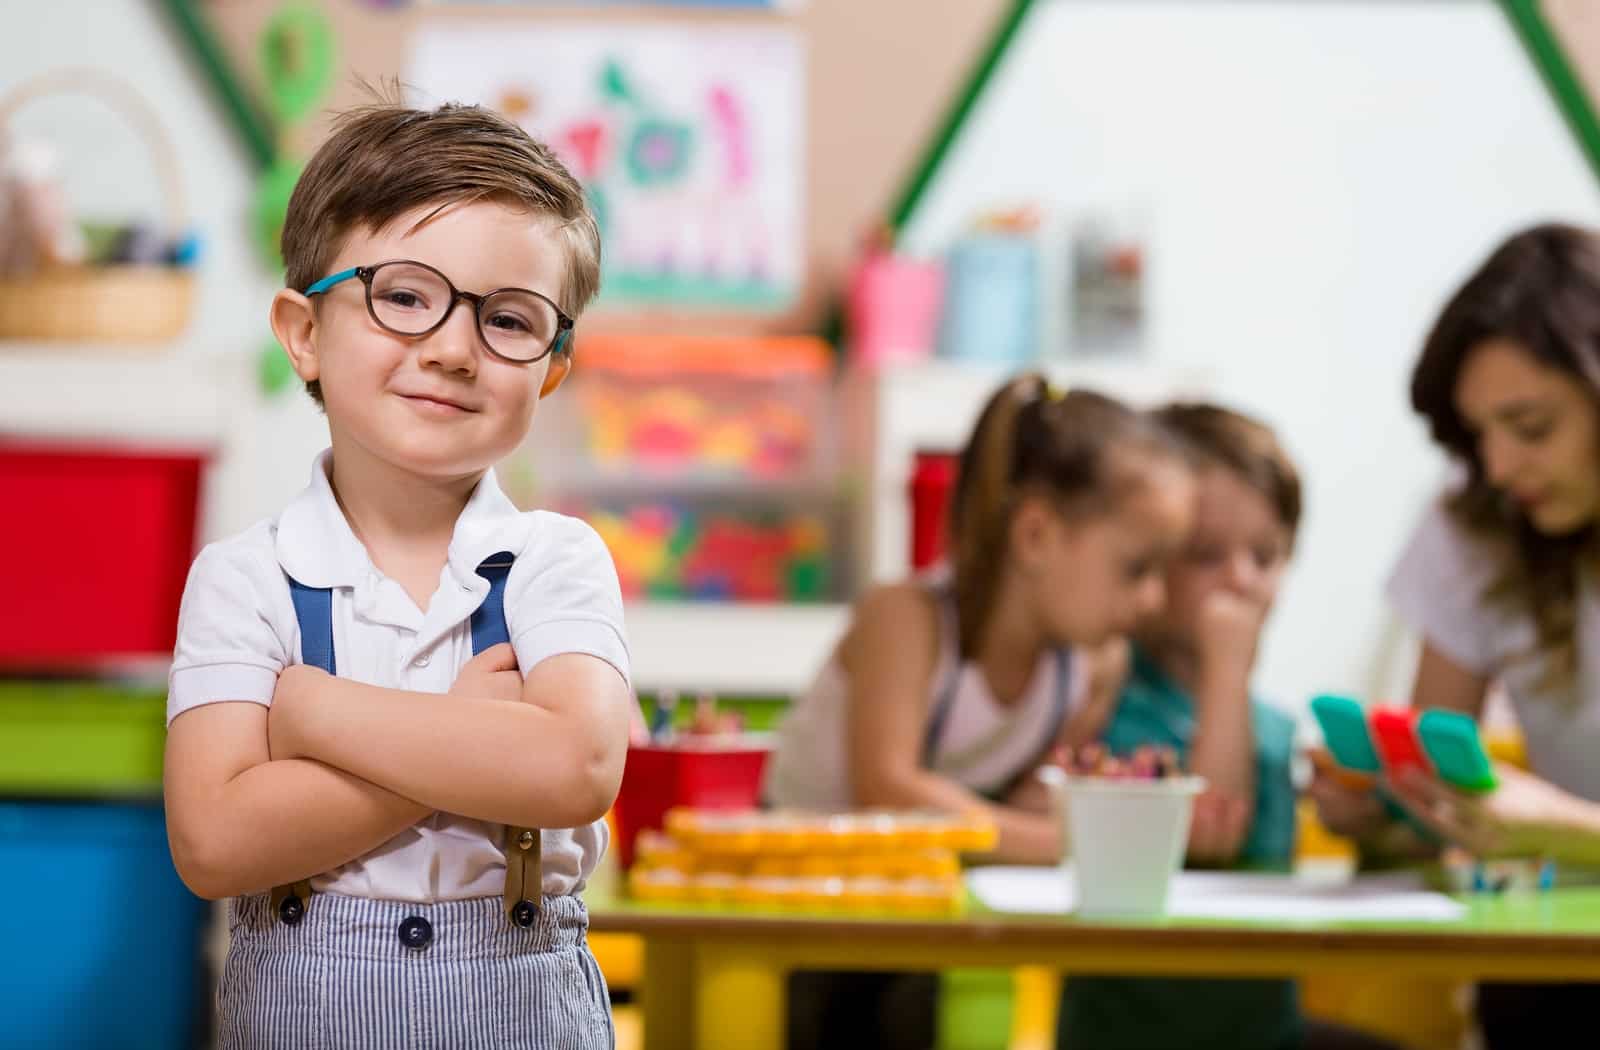 A little boy with suspenders and glasses crossing his arms smiling with his peers blurred, playing in the background.